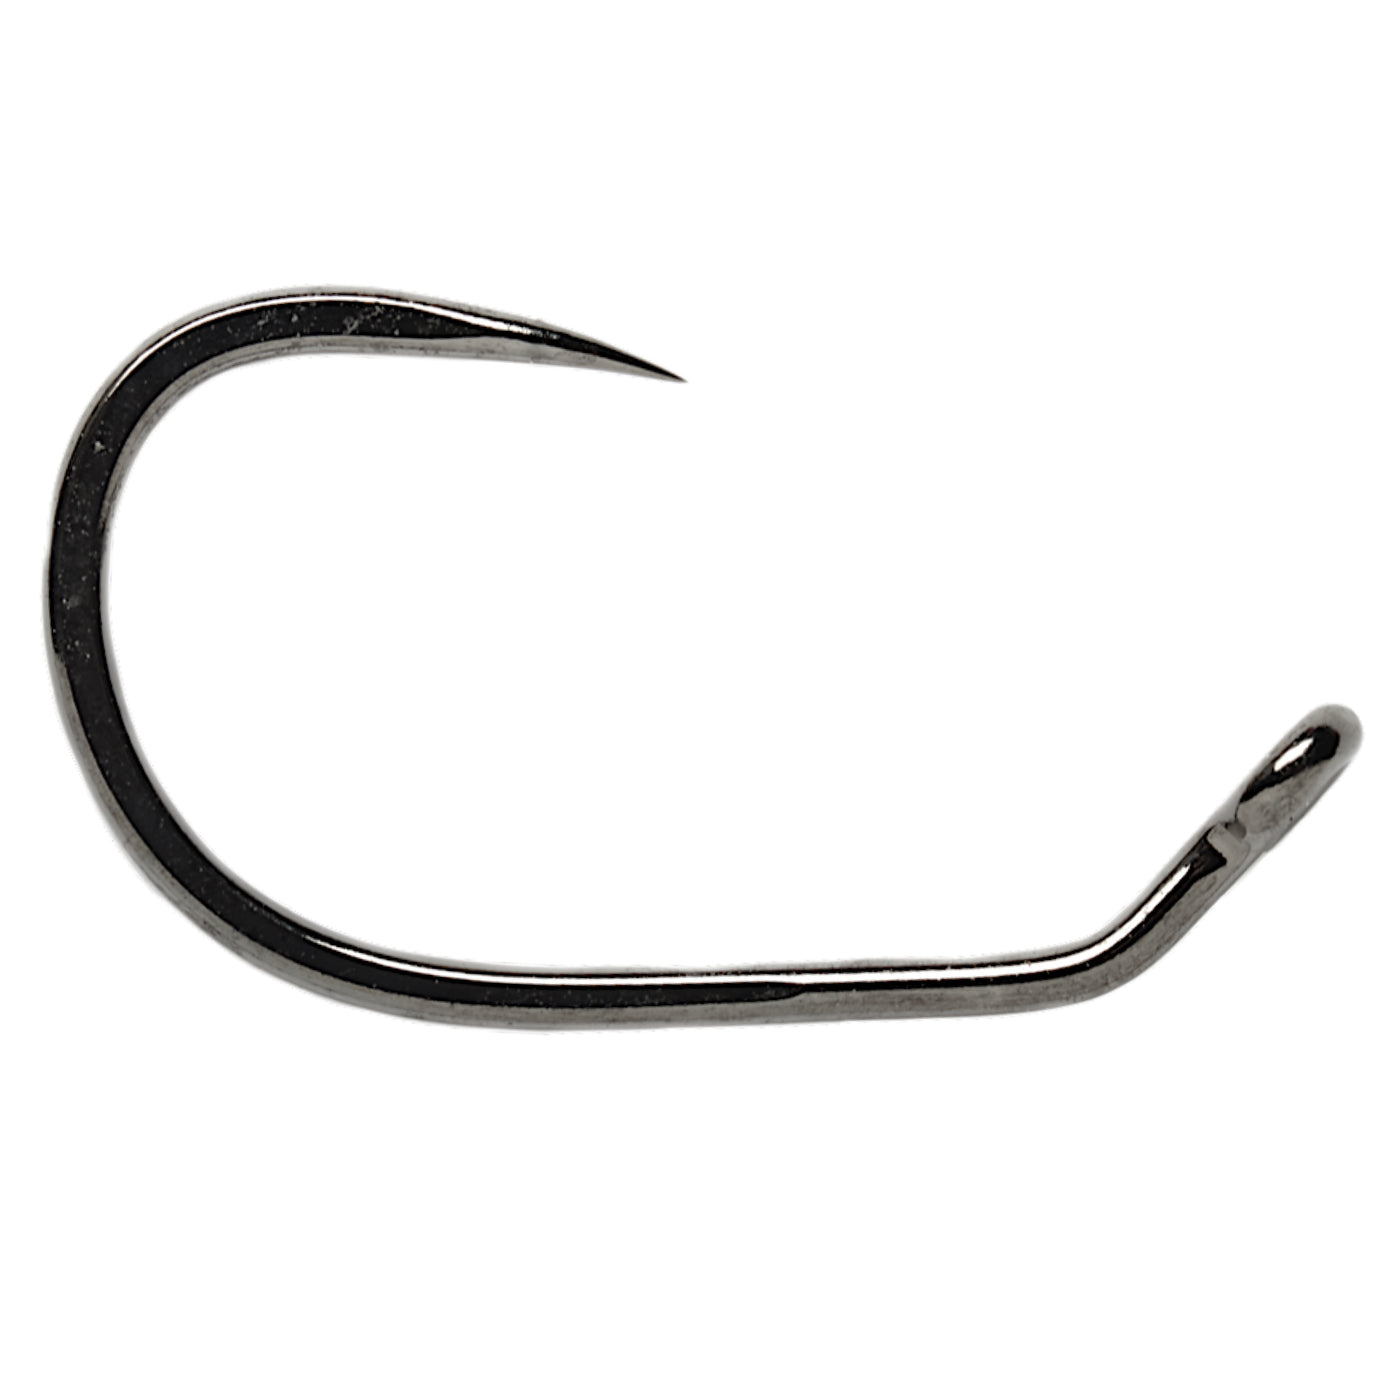 FULLING MILL BARBLESS TROUT FLY TYING HOOKS - 50 PER PACK - BLACK NICKEL